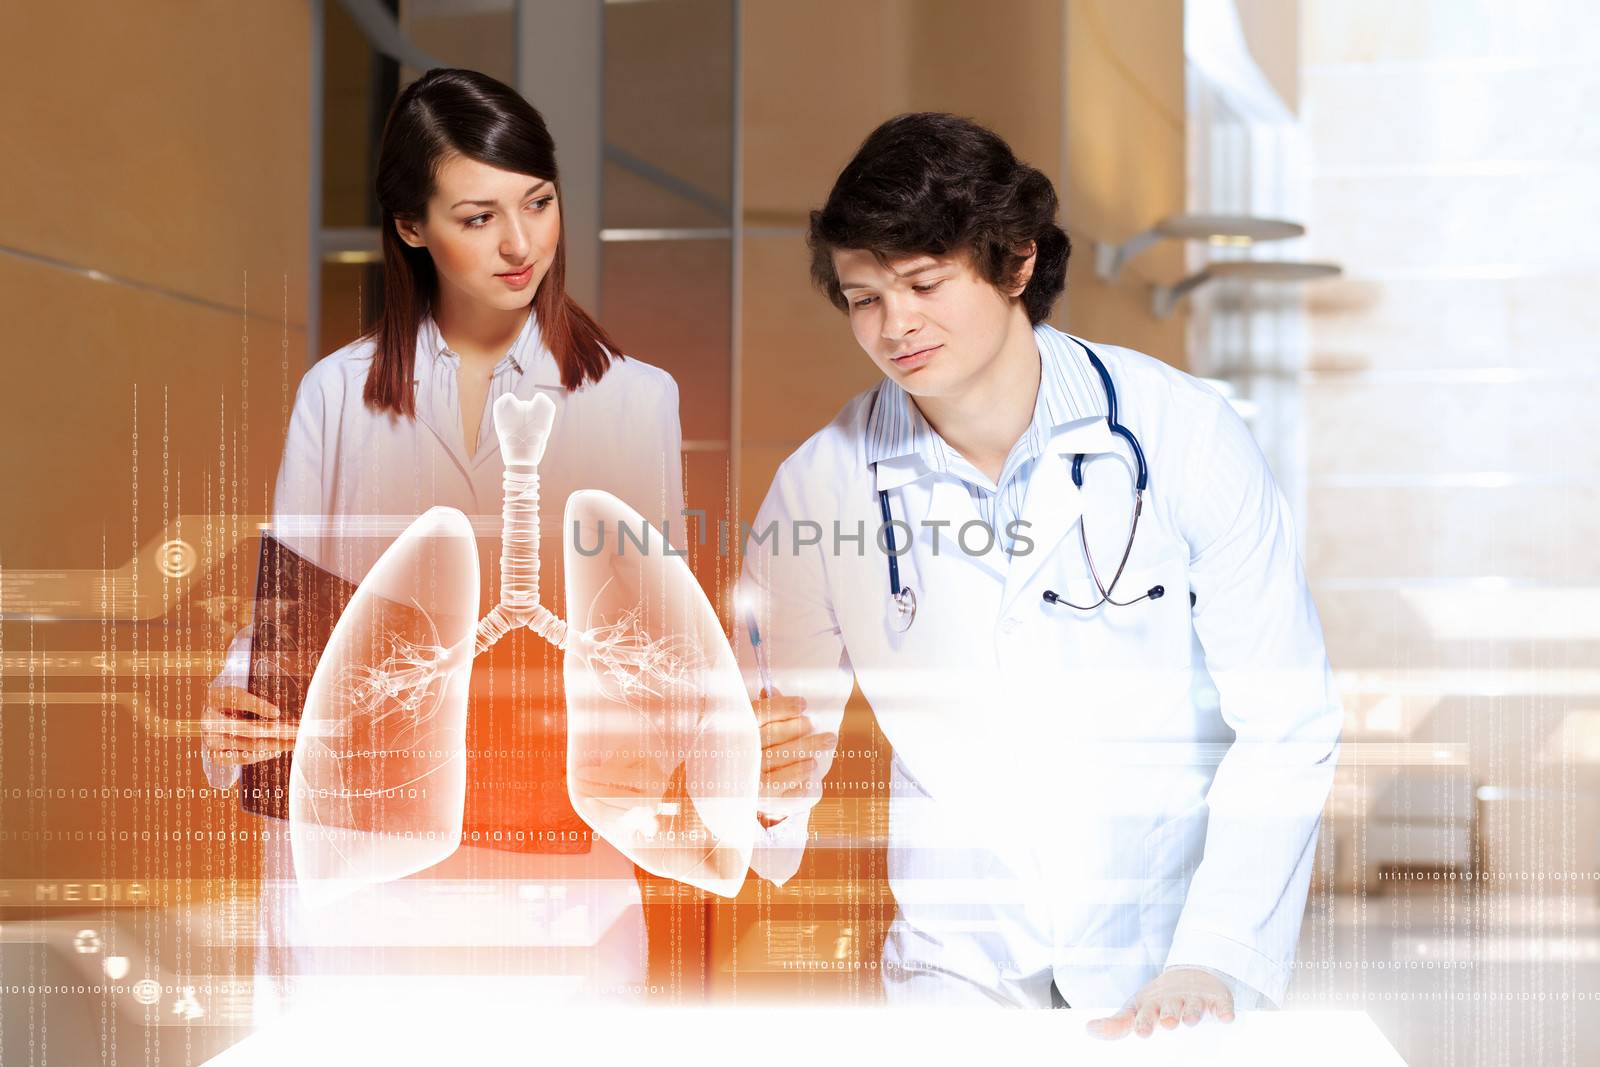 Image of two young doctors examining virtual image of lungs